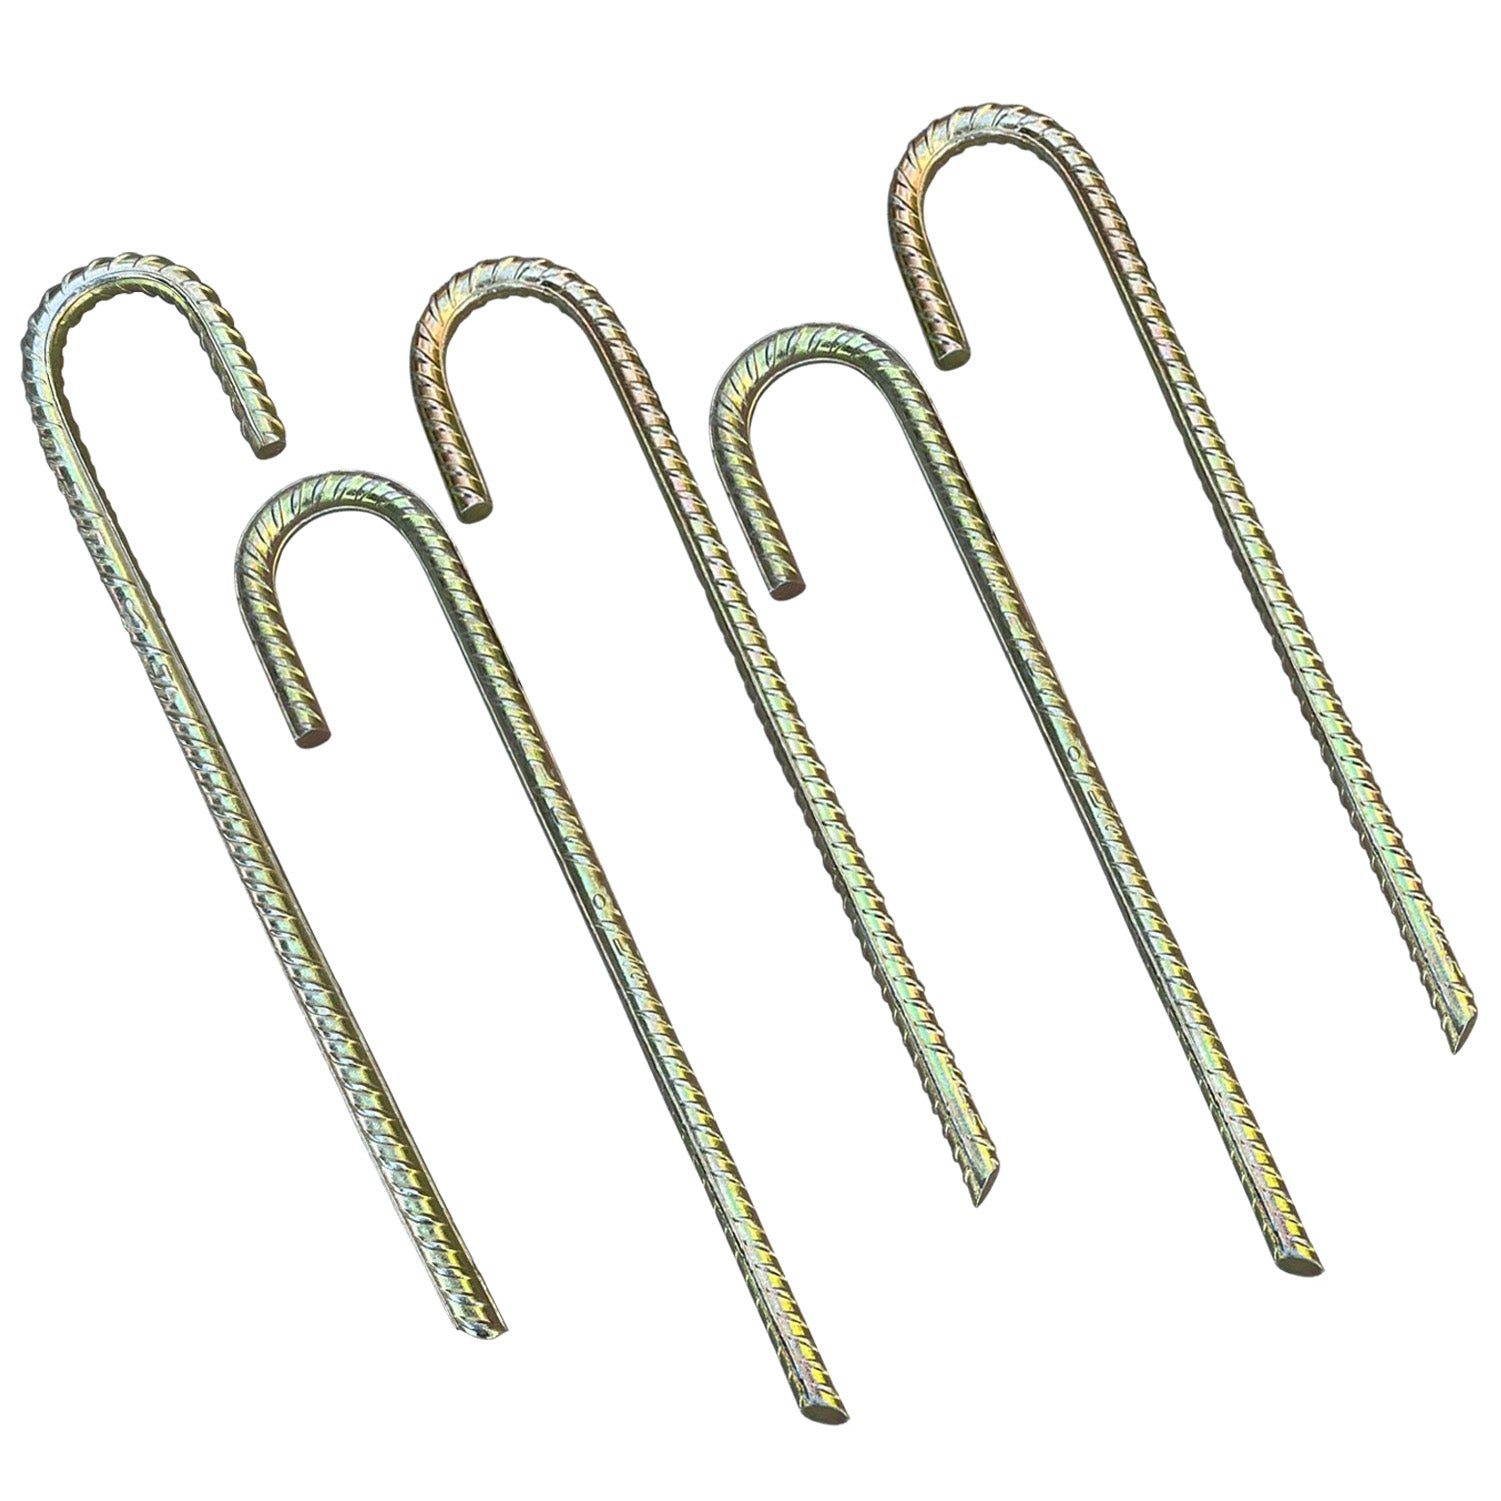 S & J PRODUCTS Shear Pins, Stainless Steel & Brass